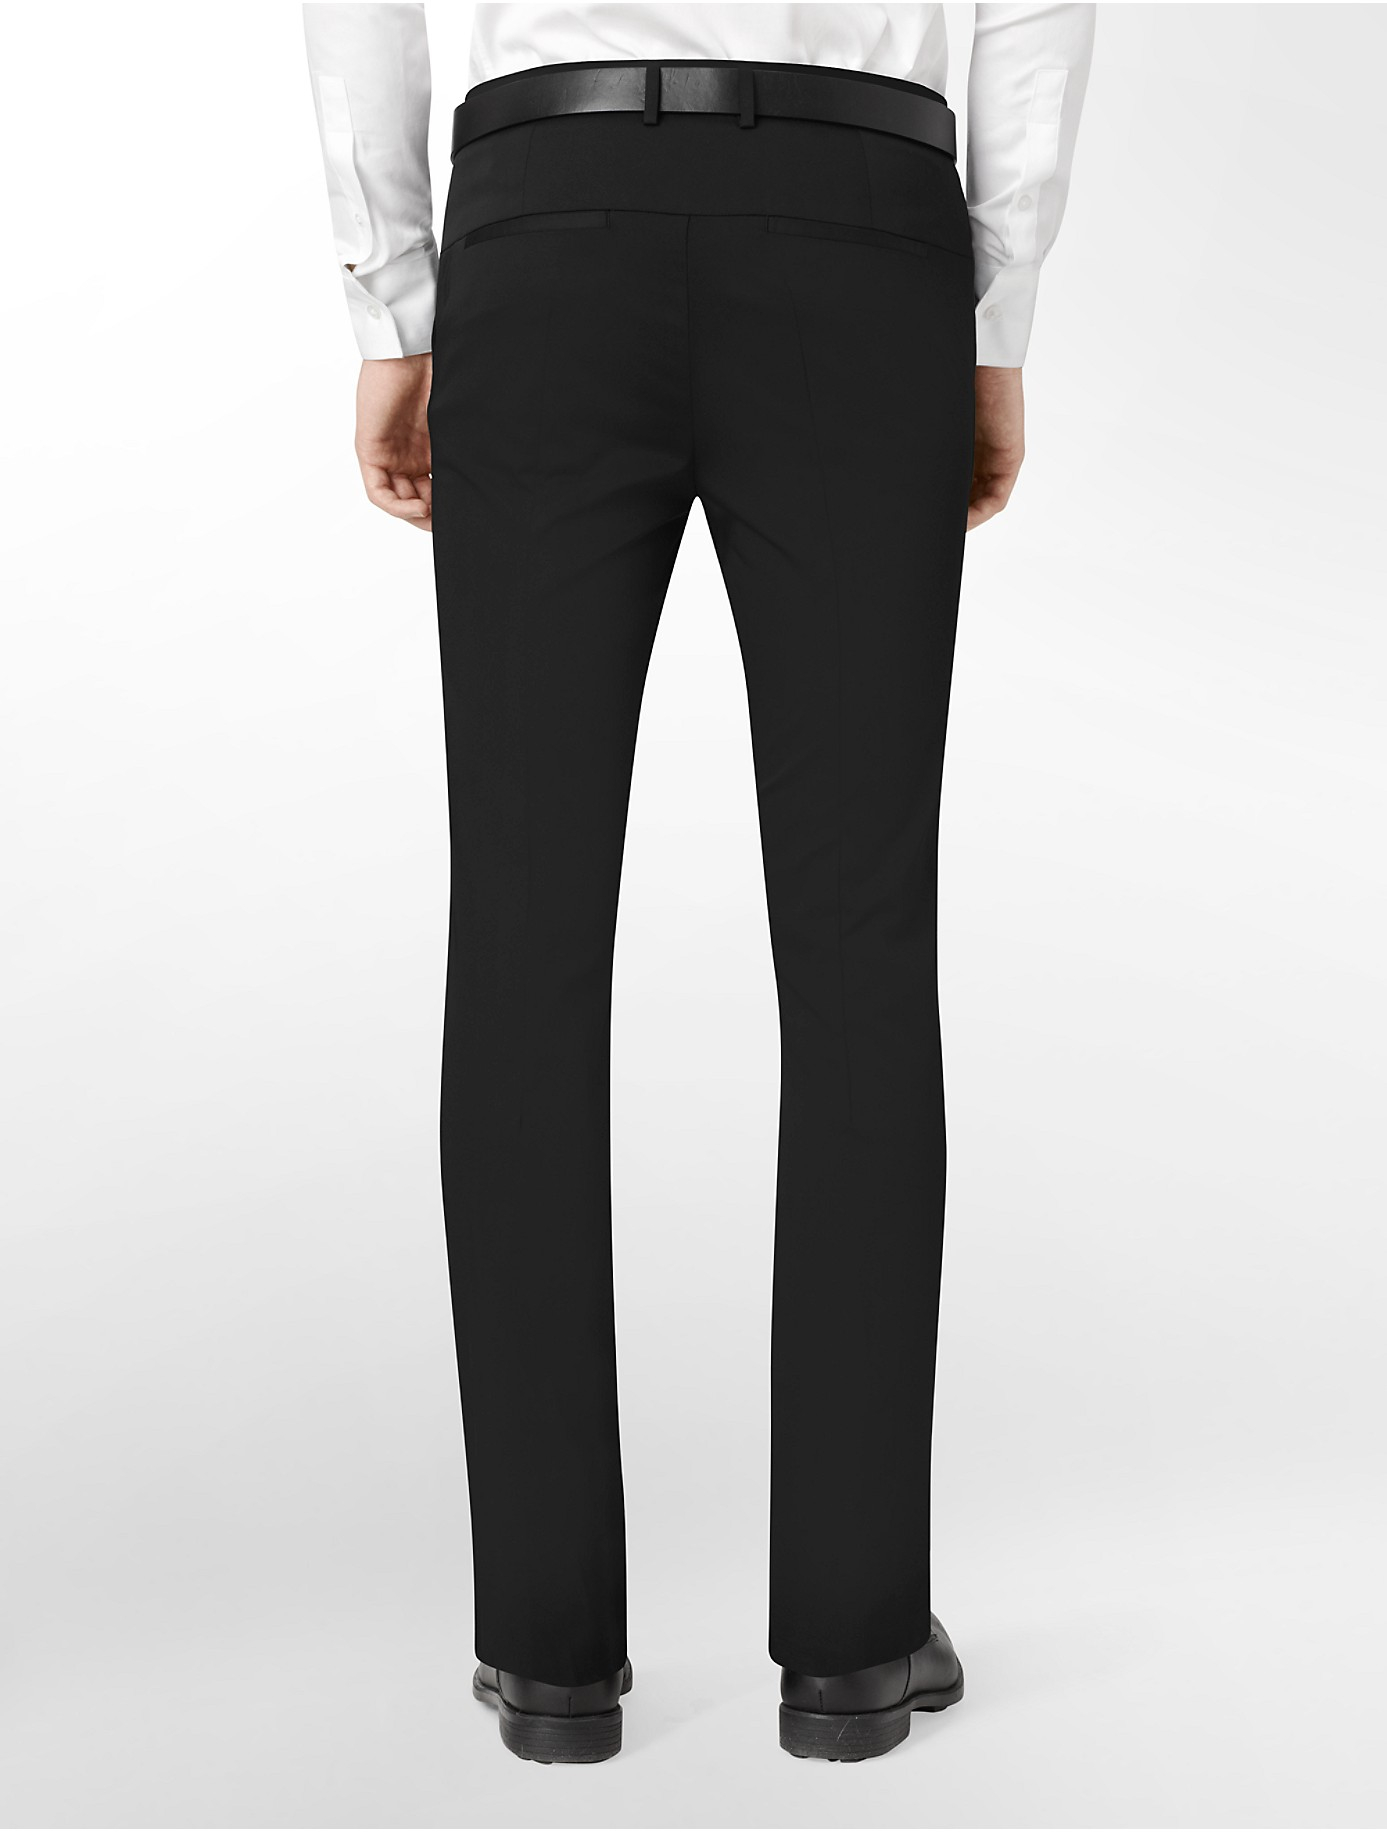 Calvin klein White Label X Fit Ultra Slim Fit Stretch Dress Pants in ...